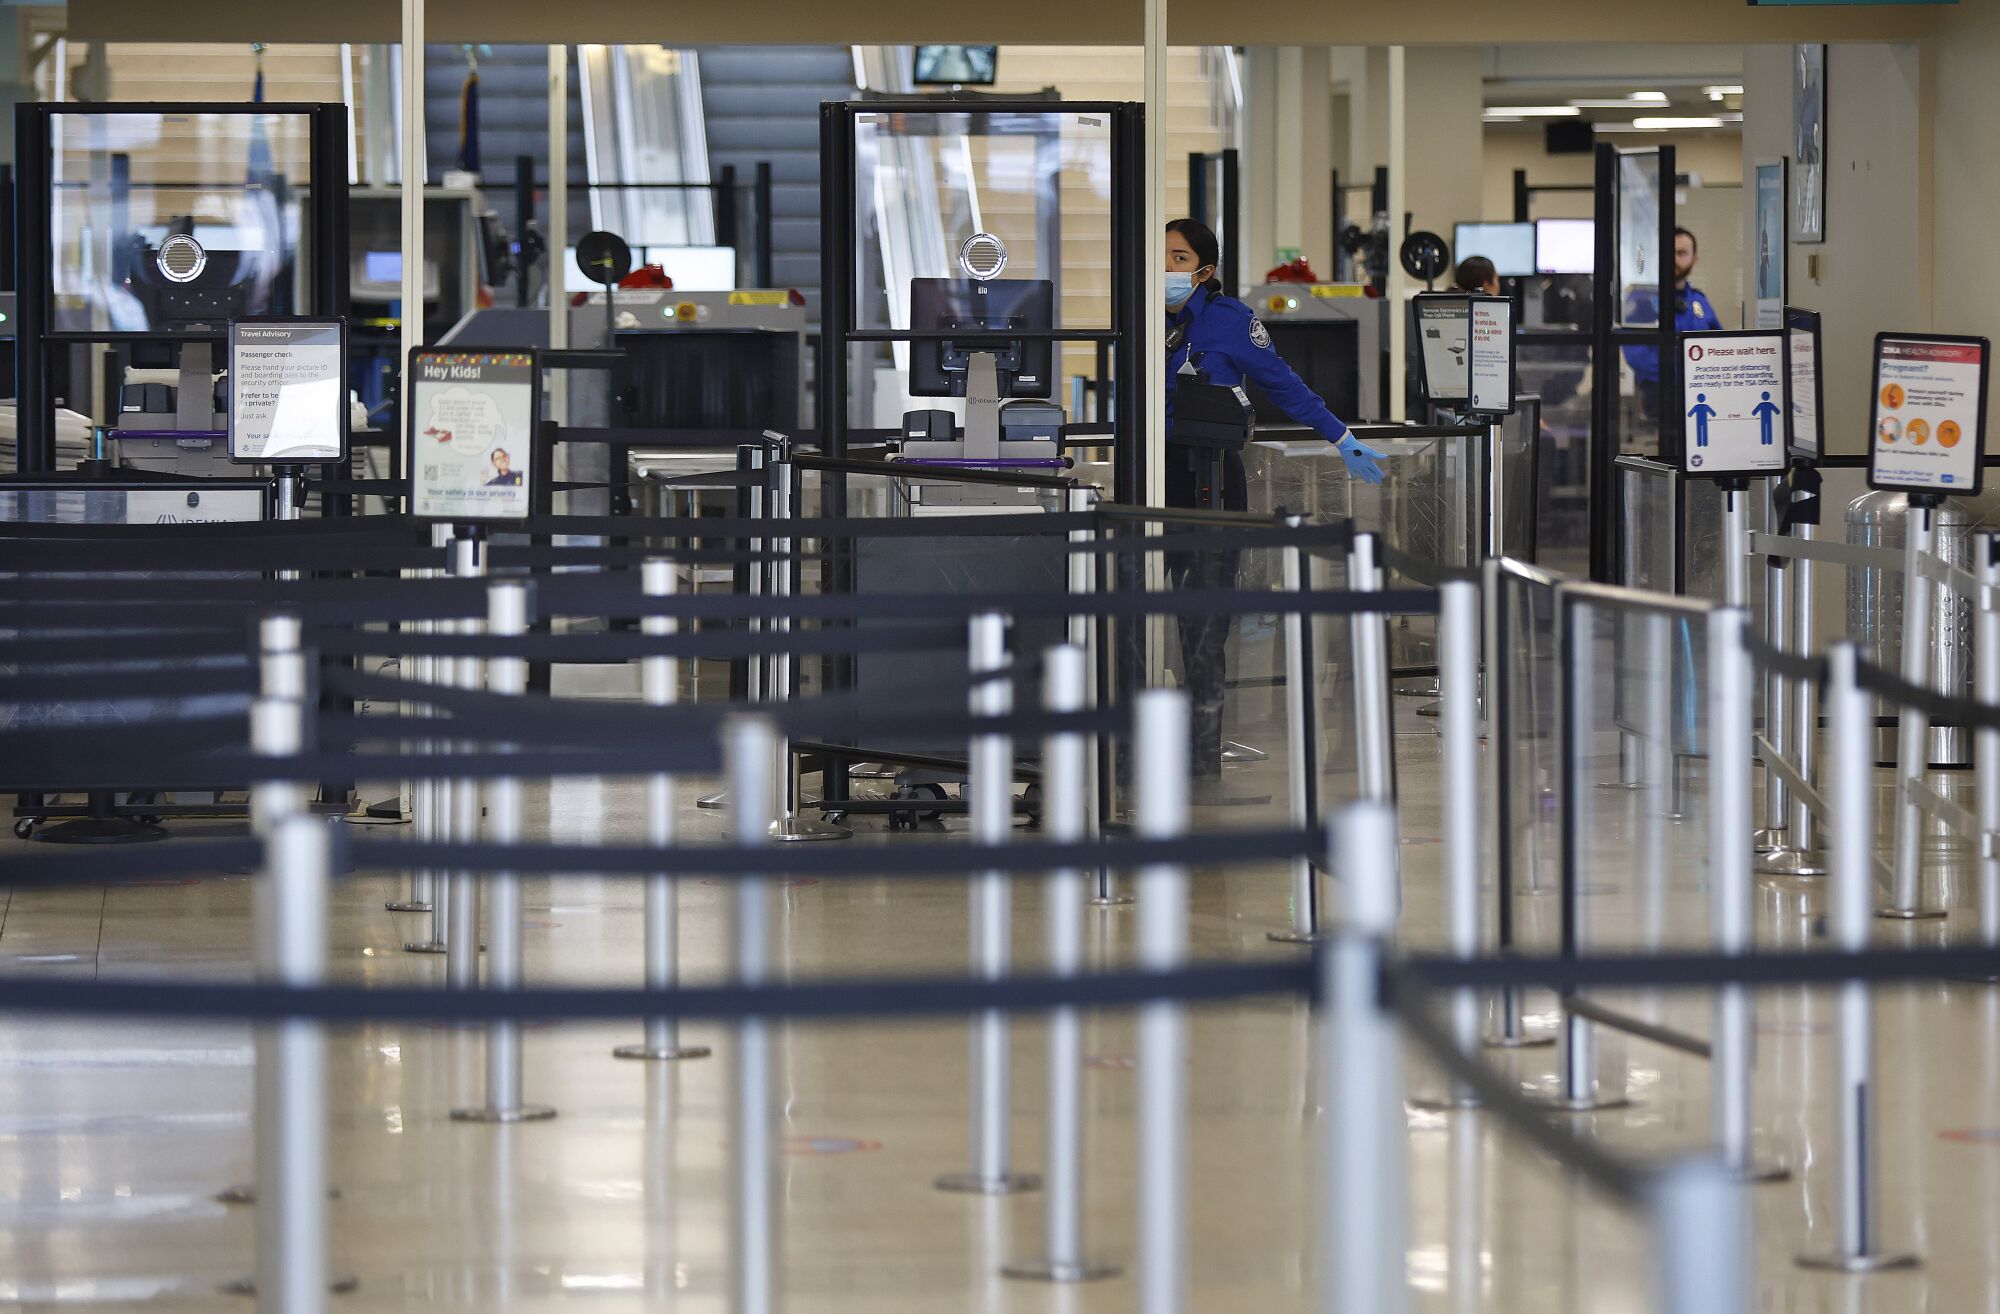 The TSA security line was virtually empty at terminal 1 at the San Diego International Airport 